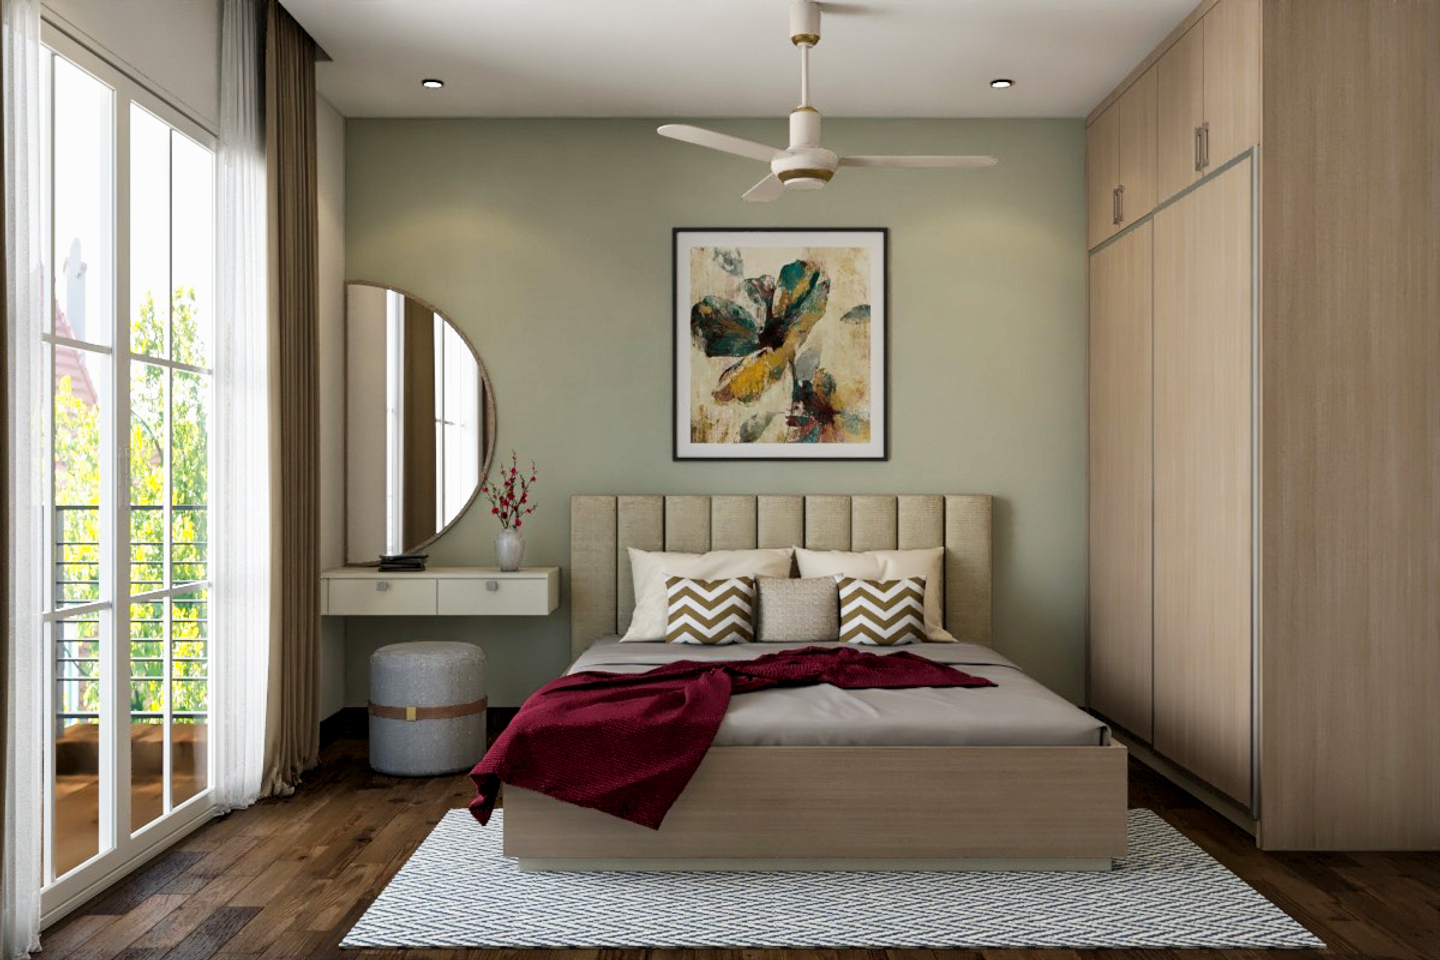 Master Bedroom Design With Sage Green Walls And Large Window | Livspace